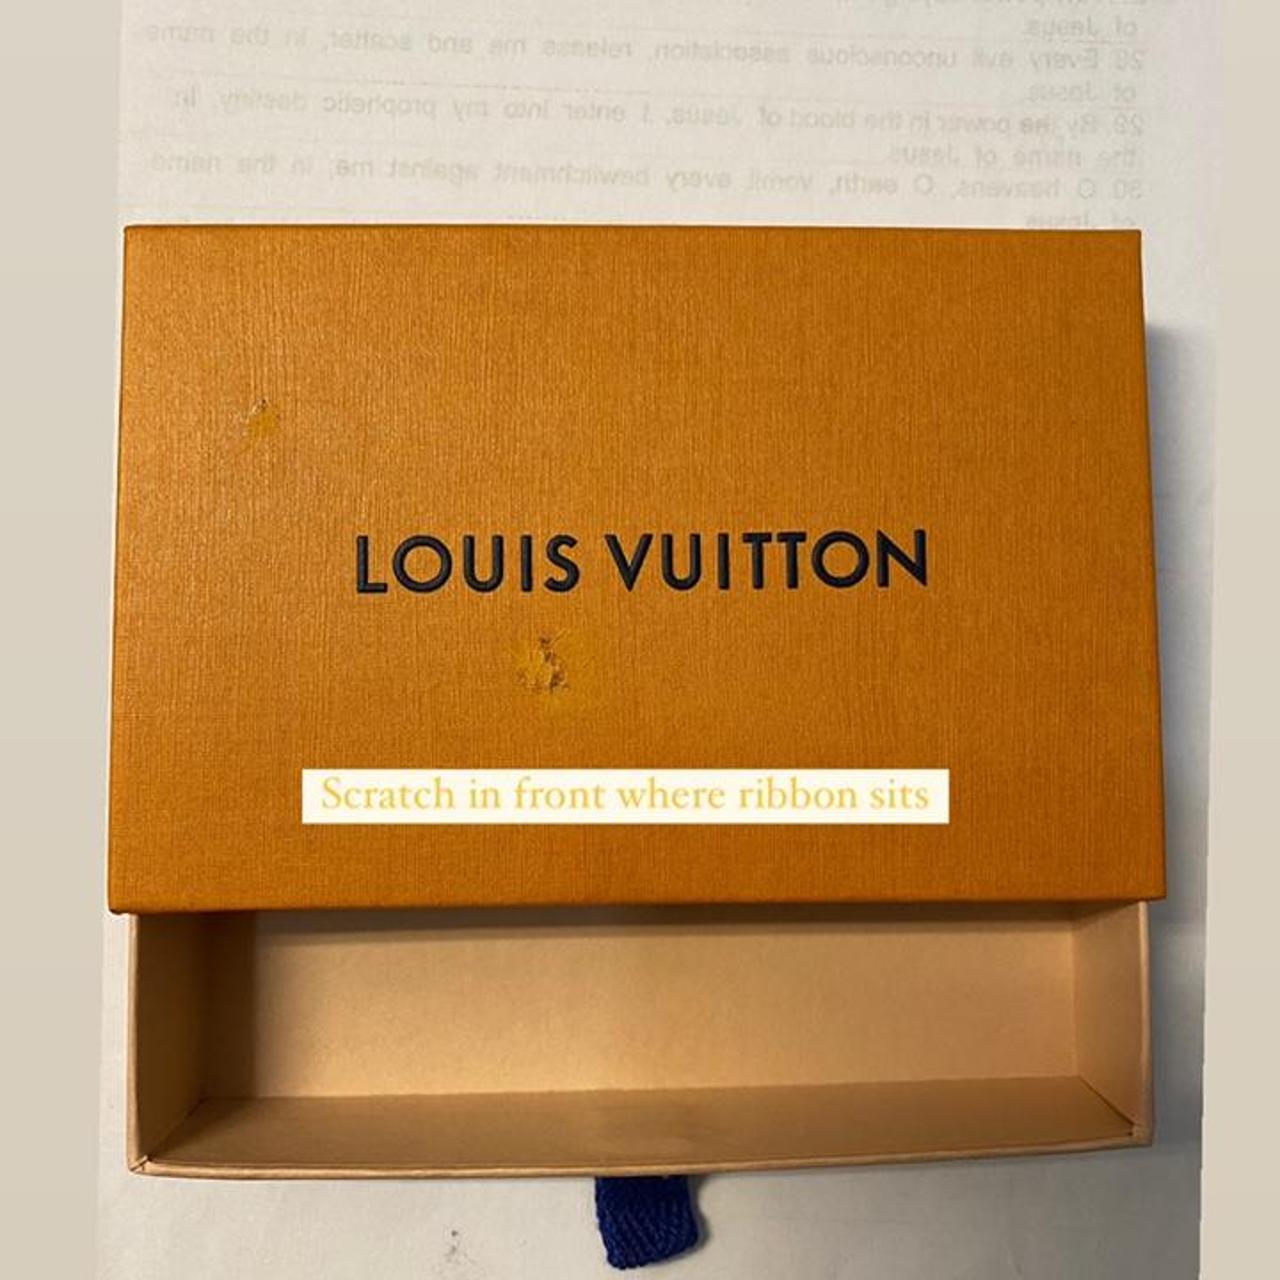 LOUIS VUITTON boxes (MESSAGE BEFORE BUYING) - - Depop